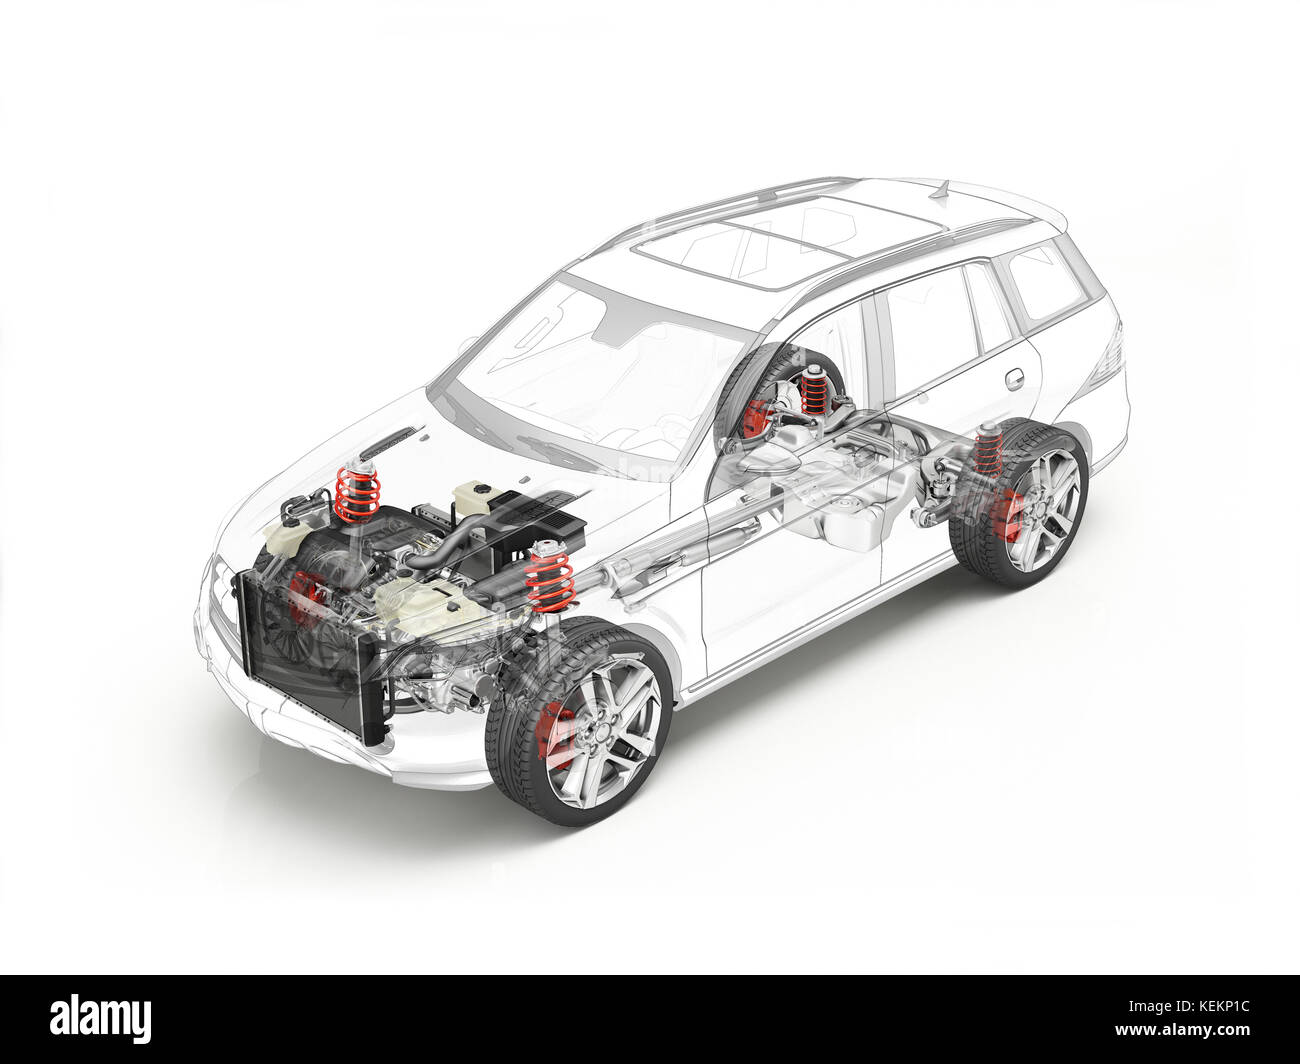 Suv car technical cutaway, cross section showing engine, radiator, fuel tank, transmission, suspensions and wheels. Stock Photo